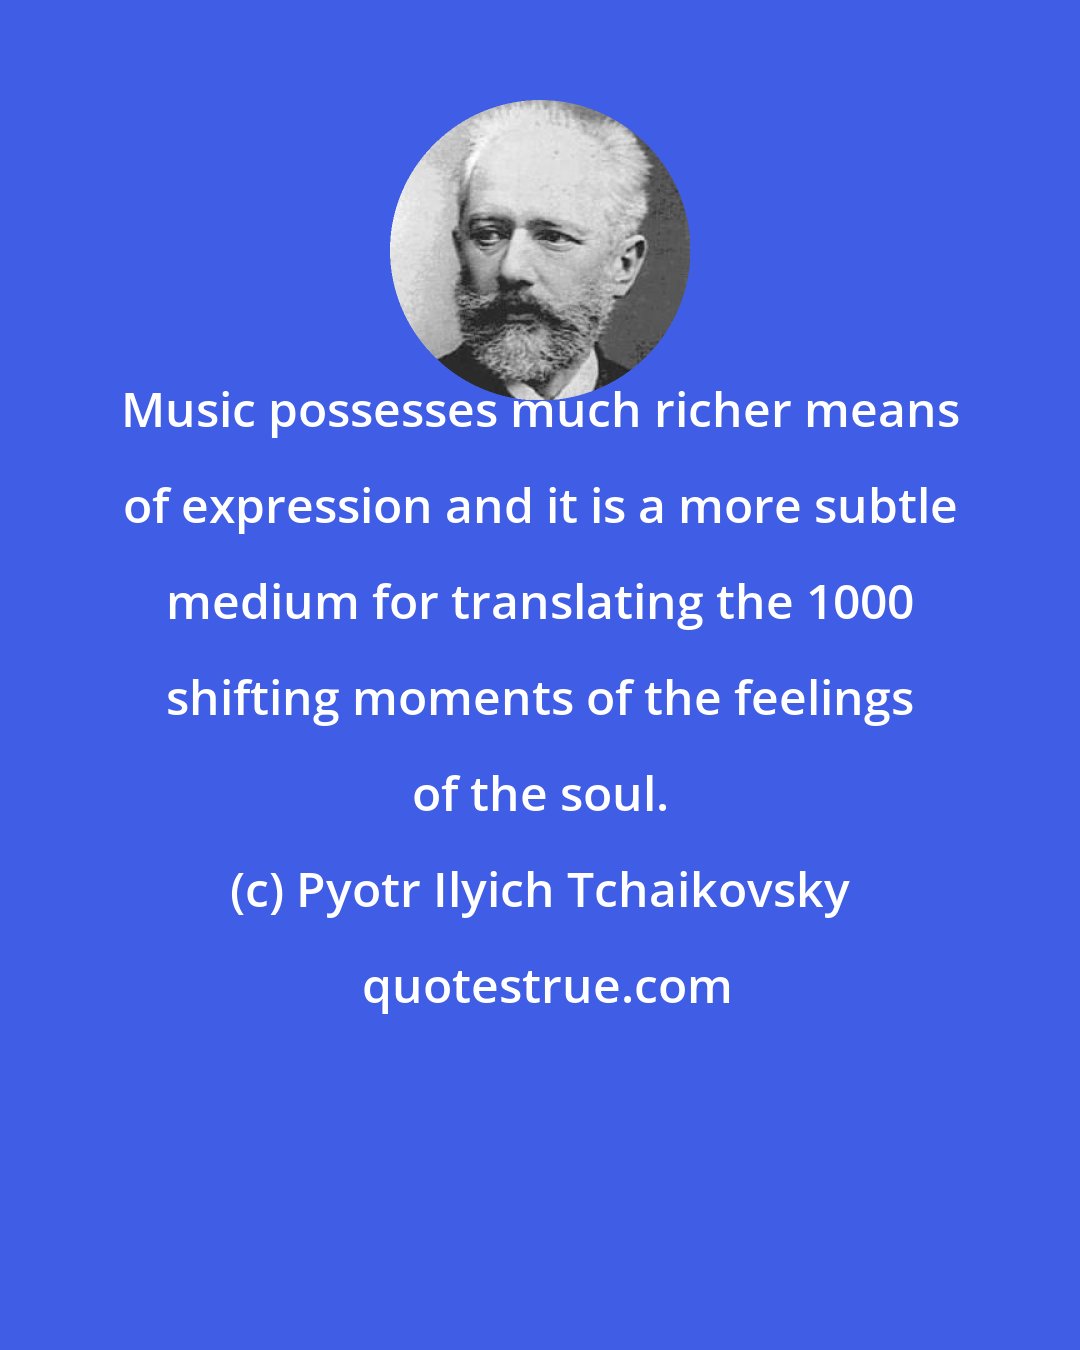 Pyotr Ilyich Tchaikovsky: Music possesses much richer means of expression and it is a more subtle medium for translating the 1000 shifting moments of the feelings of the soul.